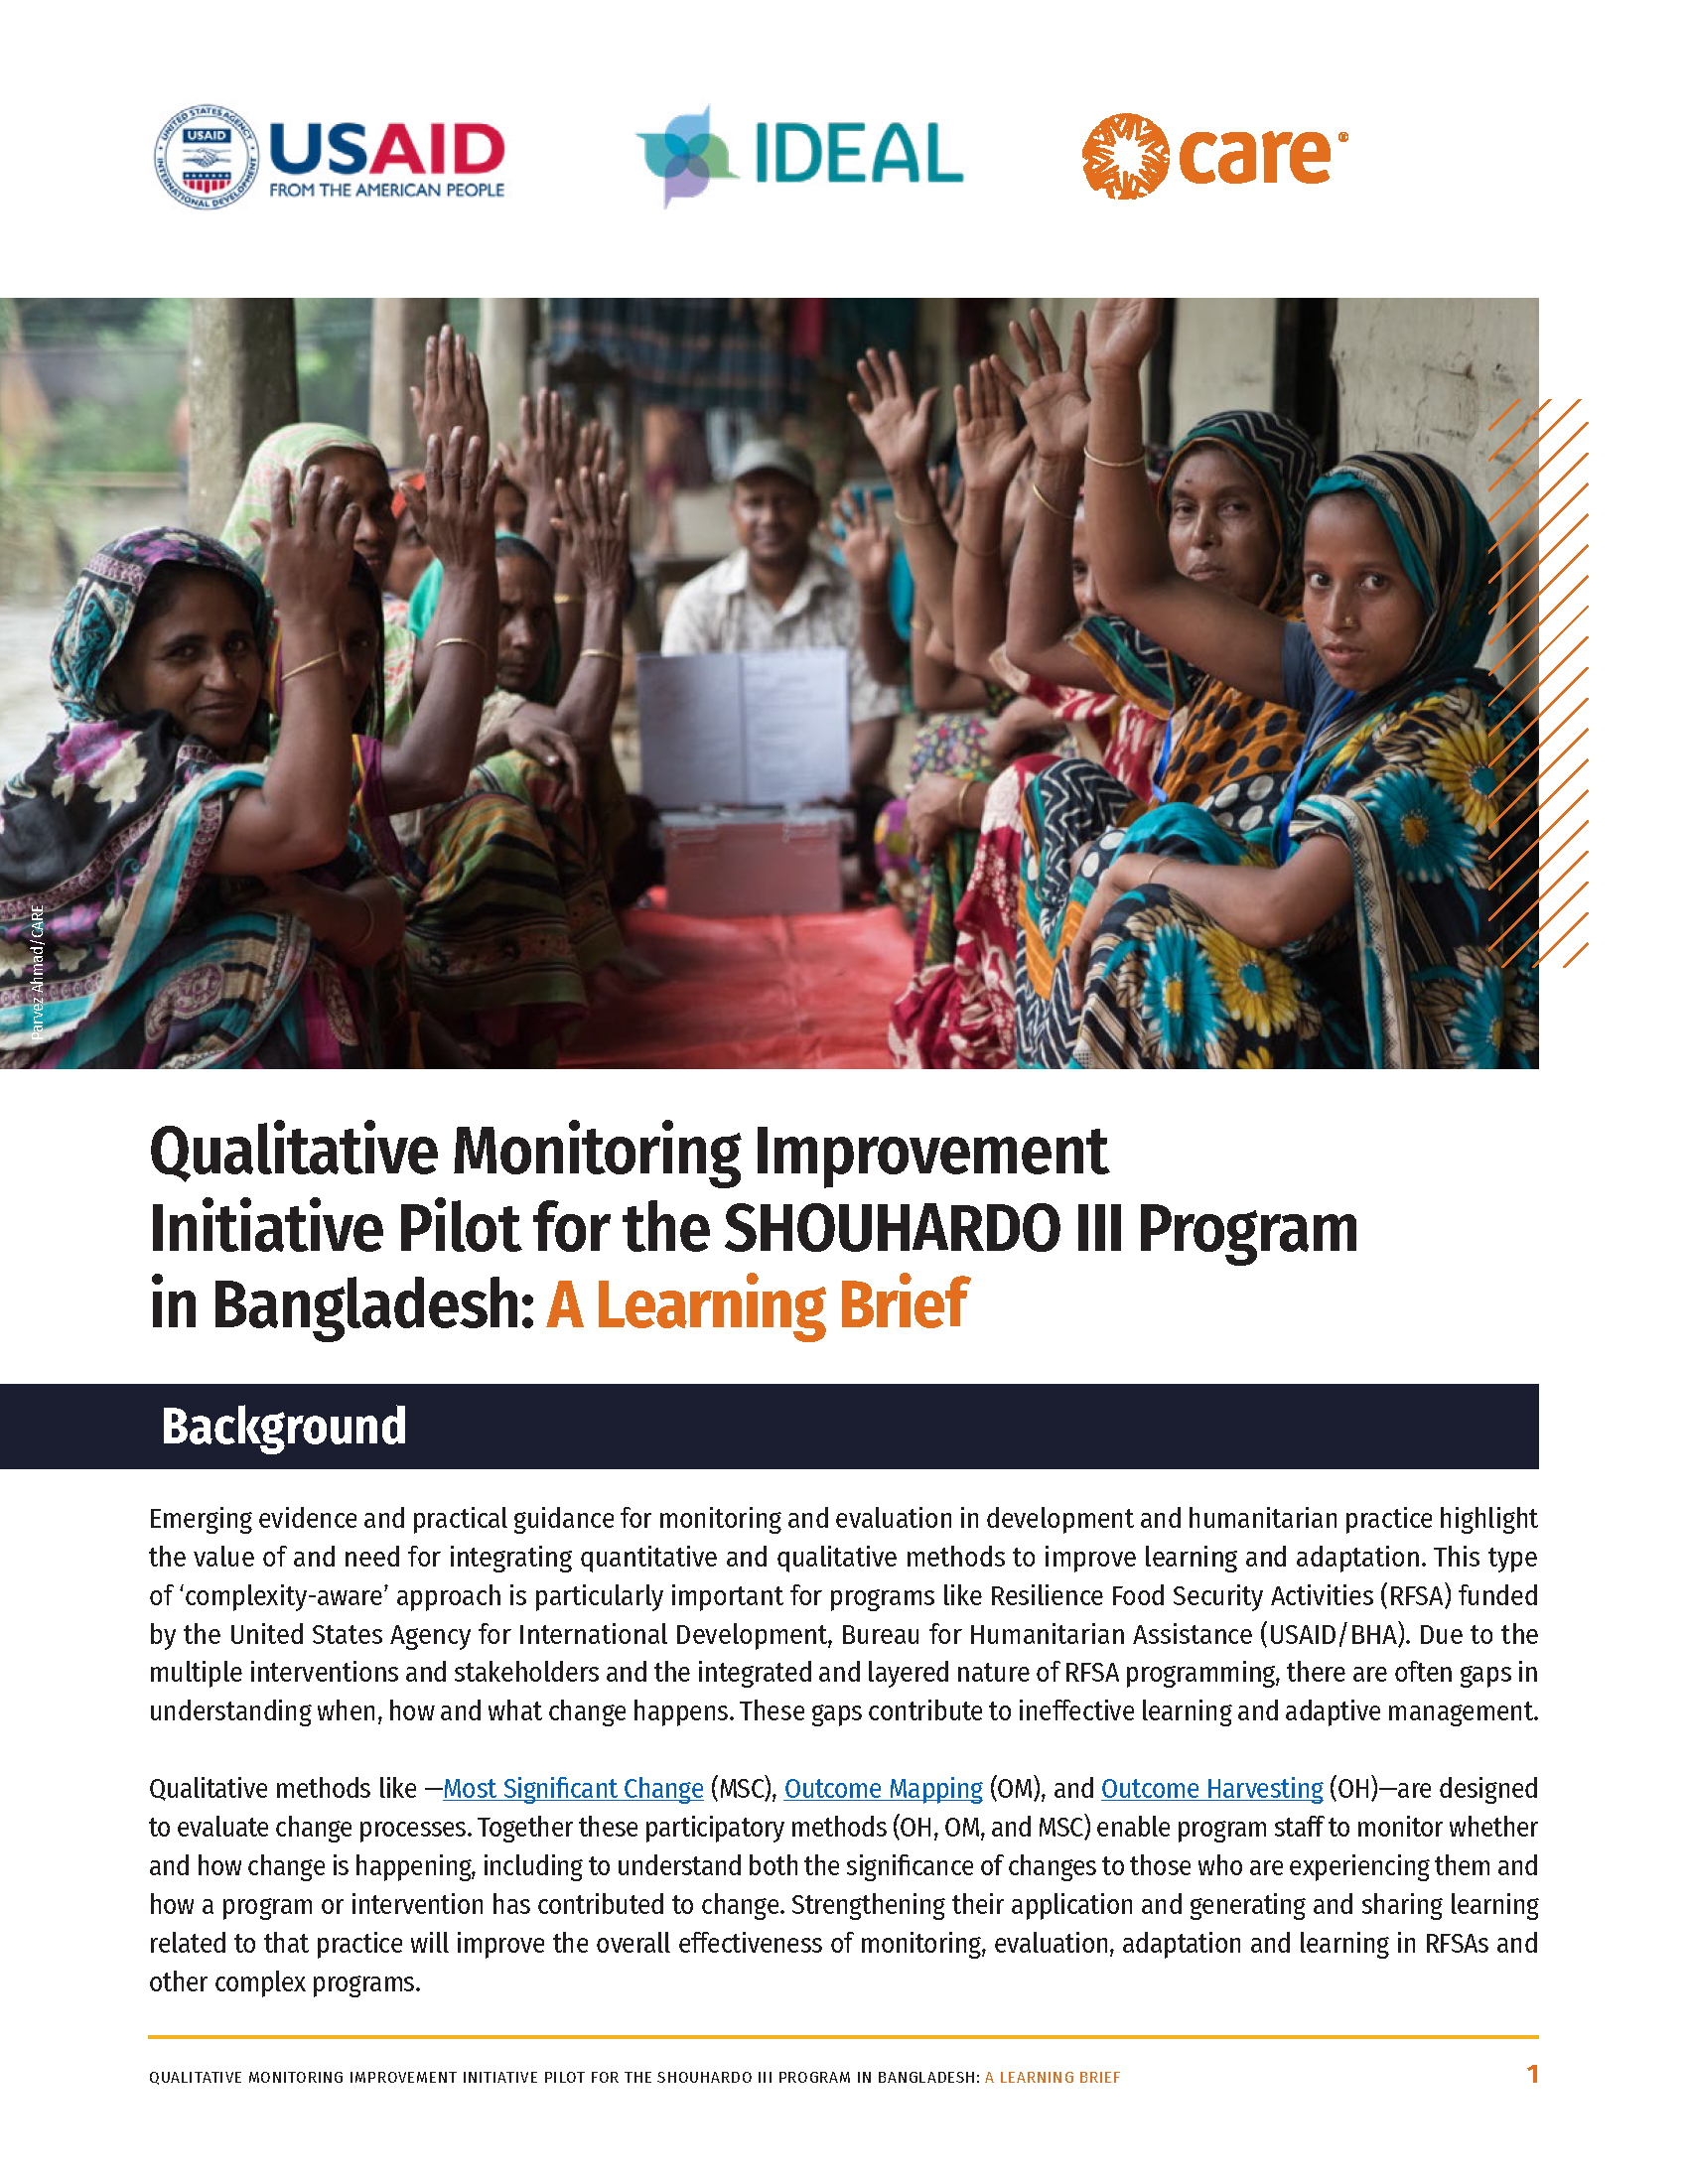 Cover page for Qualitative Monitoring Improvement Initiative Pilot for the SHOUHARDO III Program in Bangladesh: A Learning Brief